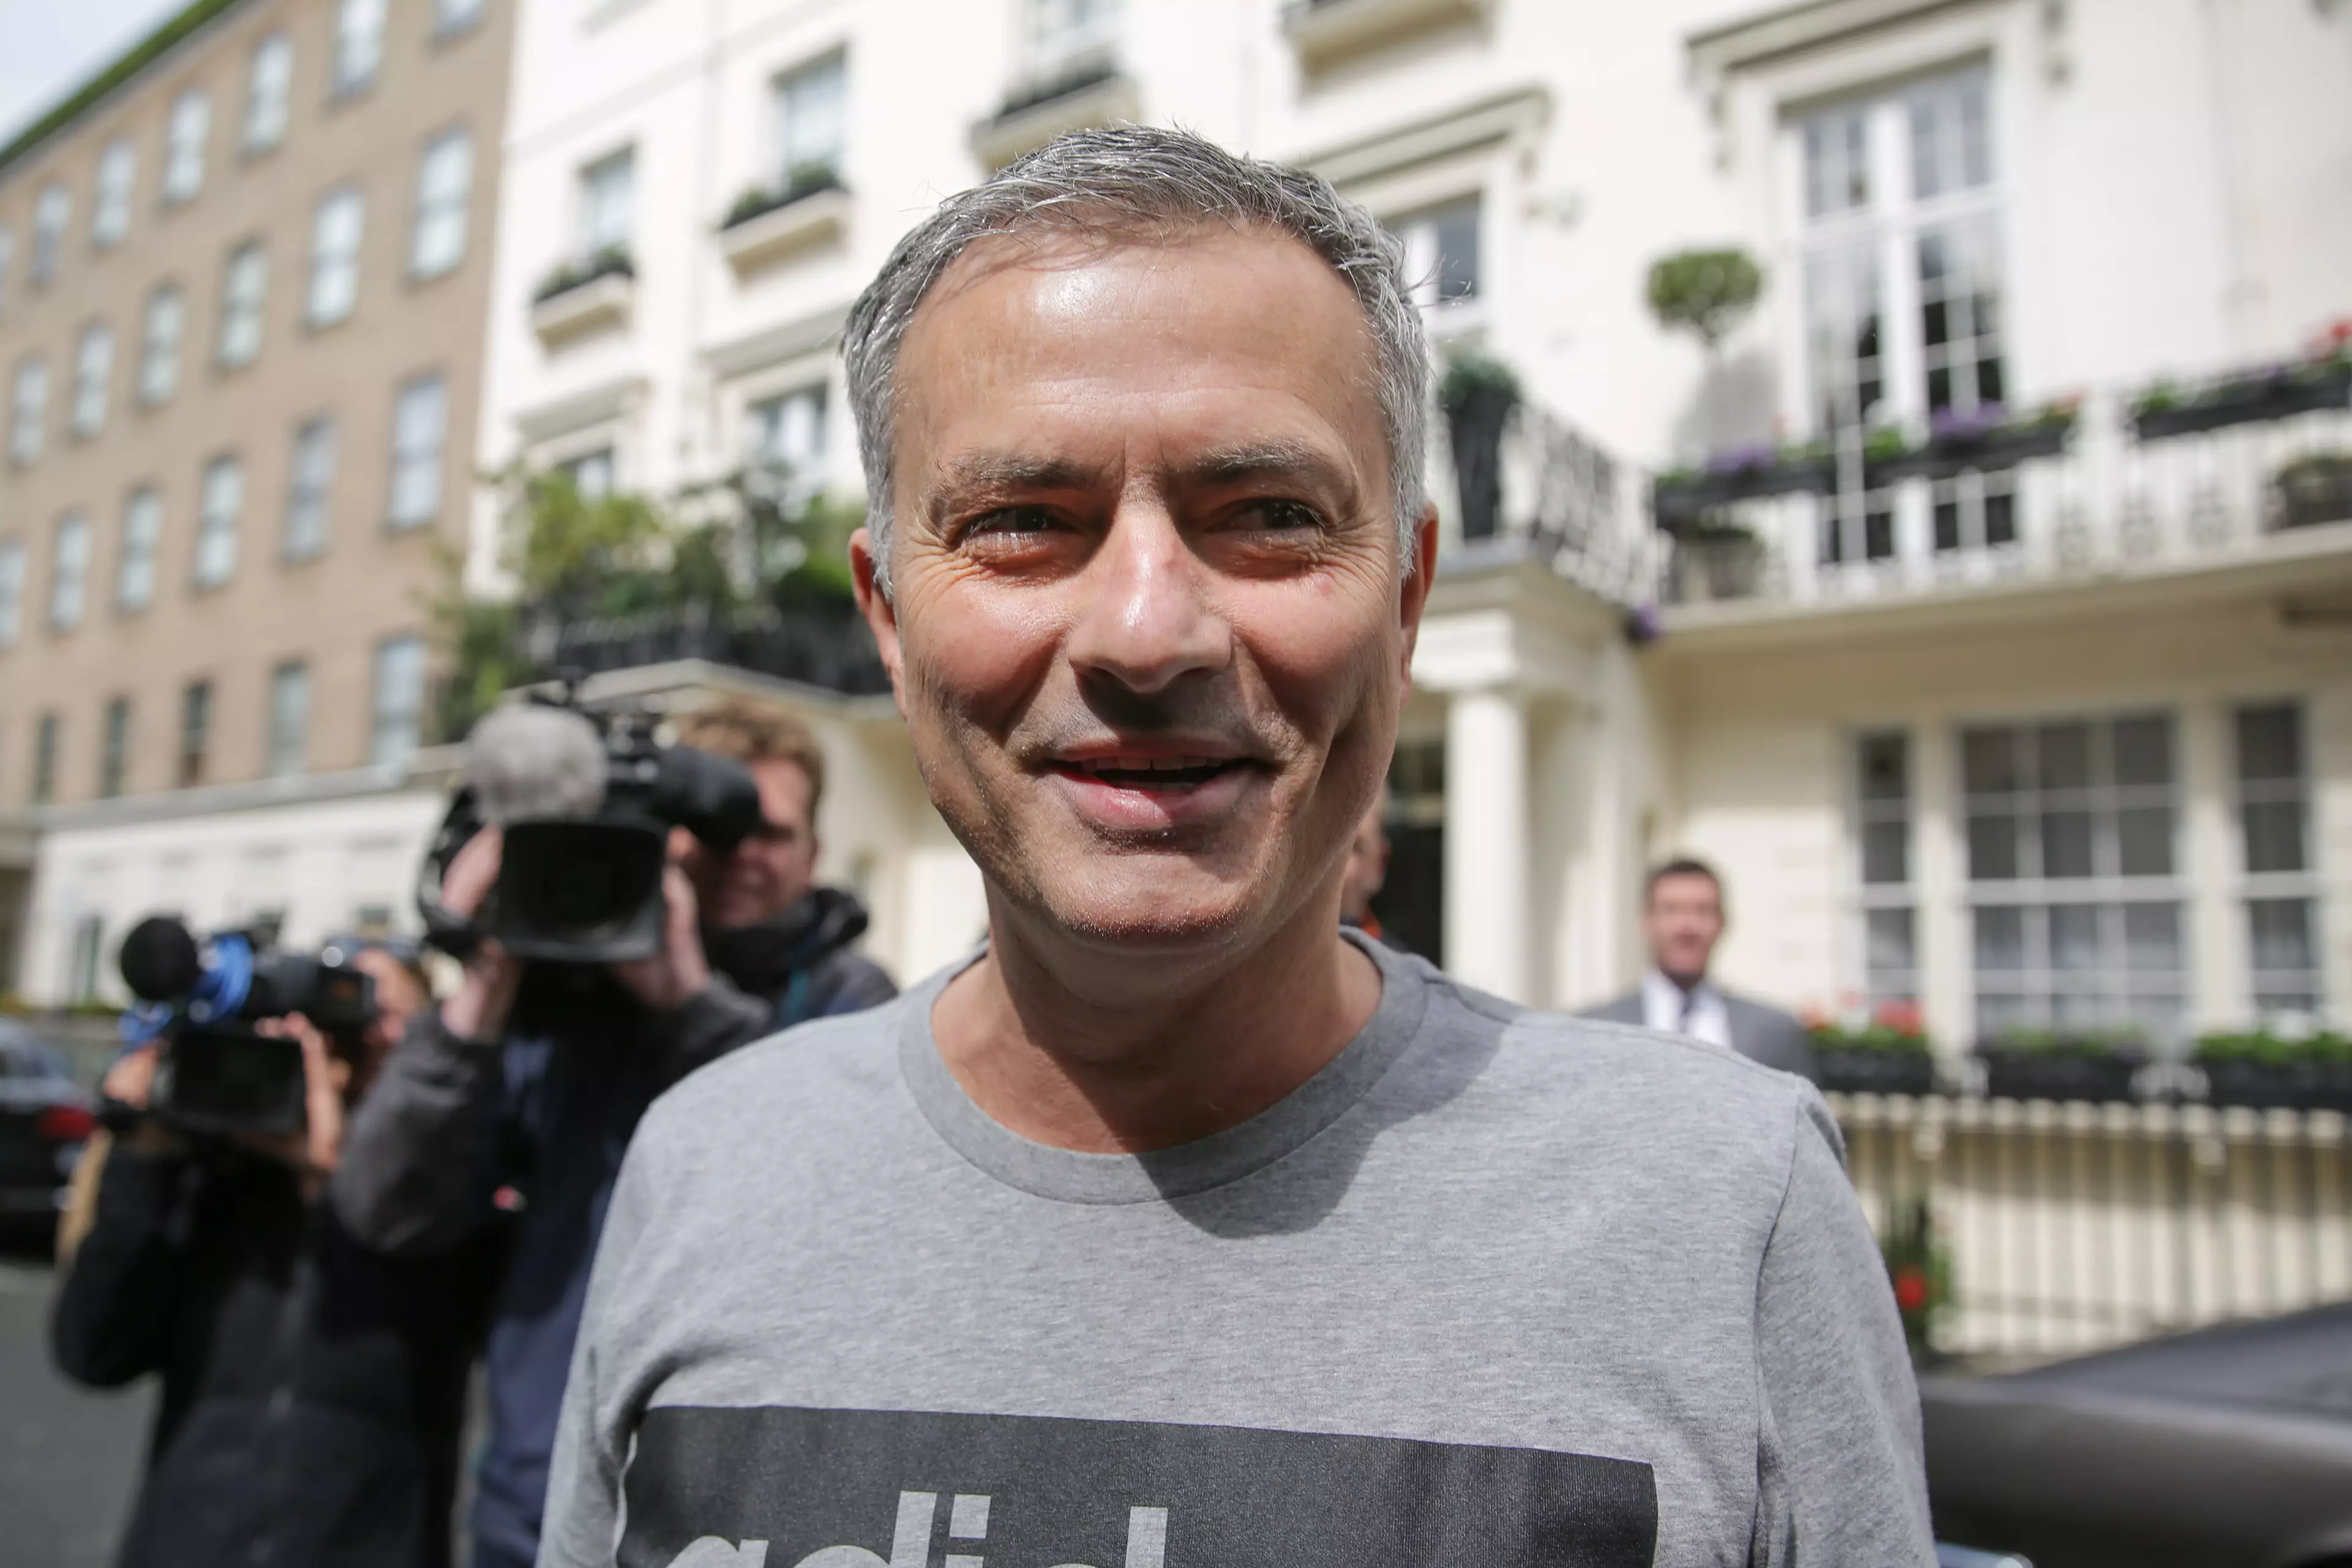 Mourinho will be happy to know he's the second best ever United manager. Image: PA Images